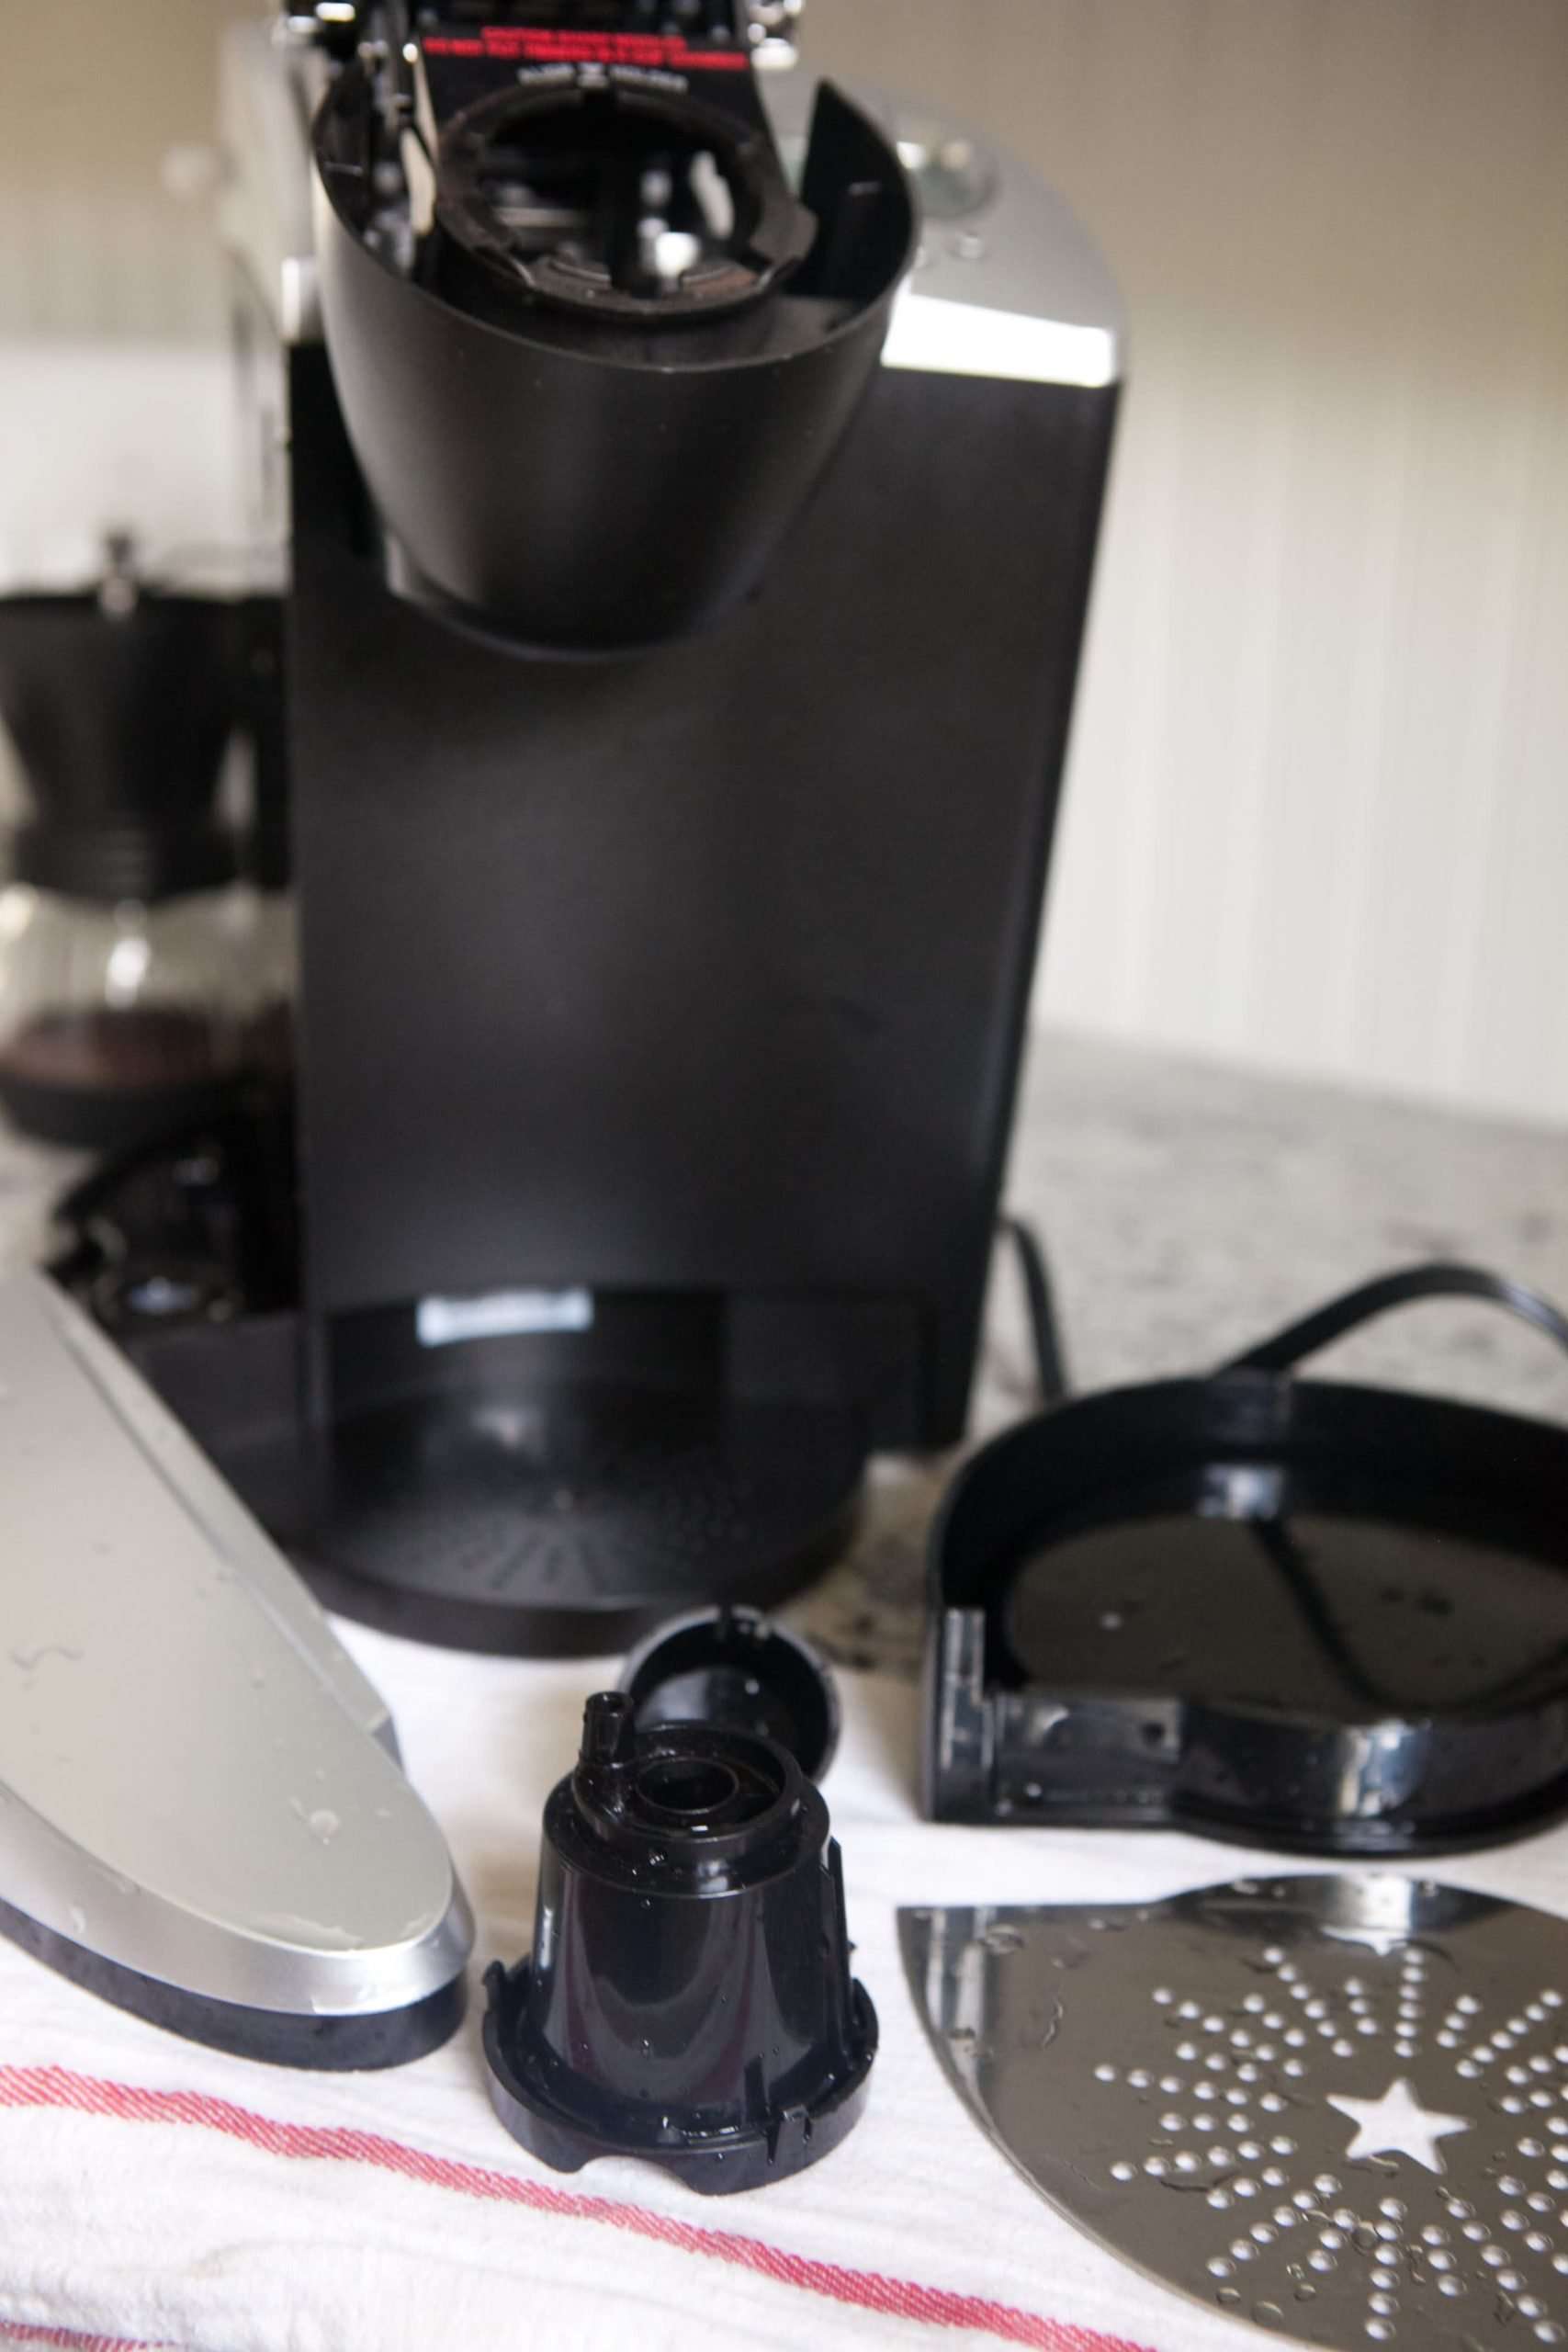 How To Clean Your Coffee Maker